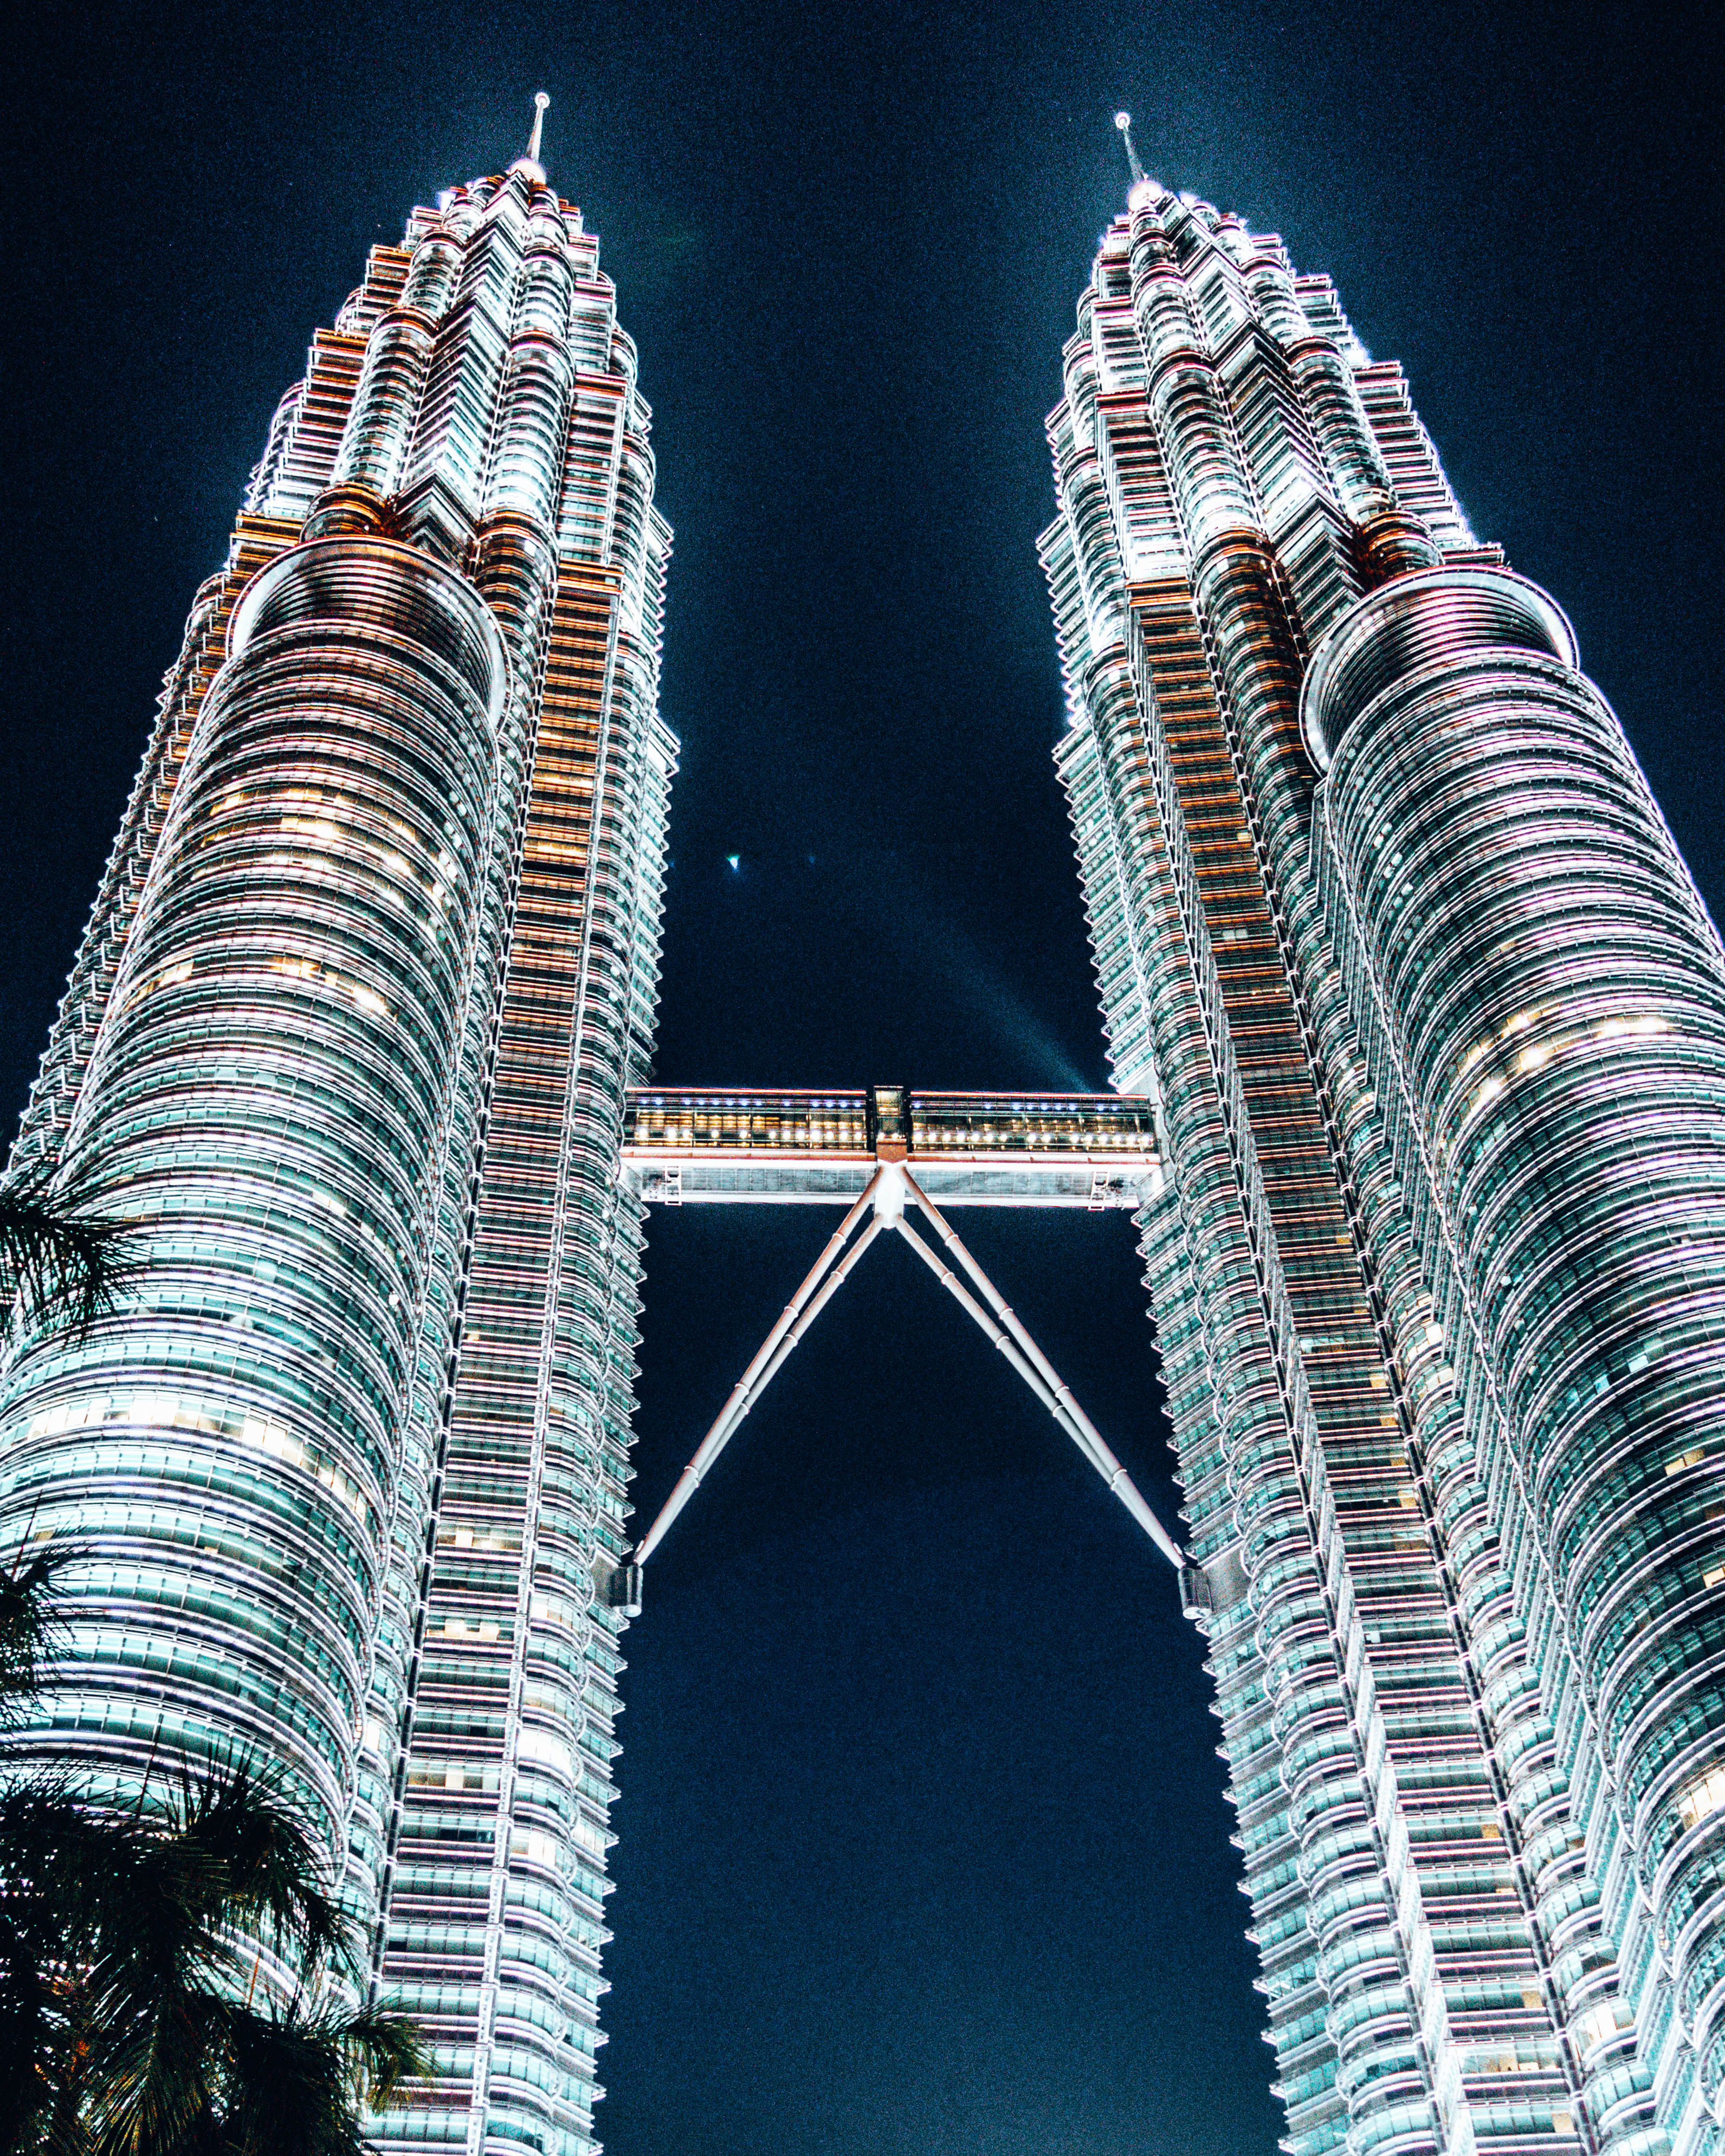 Petronas twin towers things to do in KL on your first trip - wediditourway.com